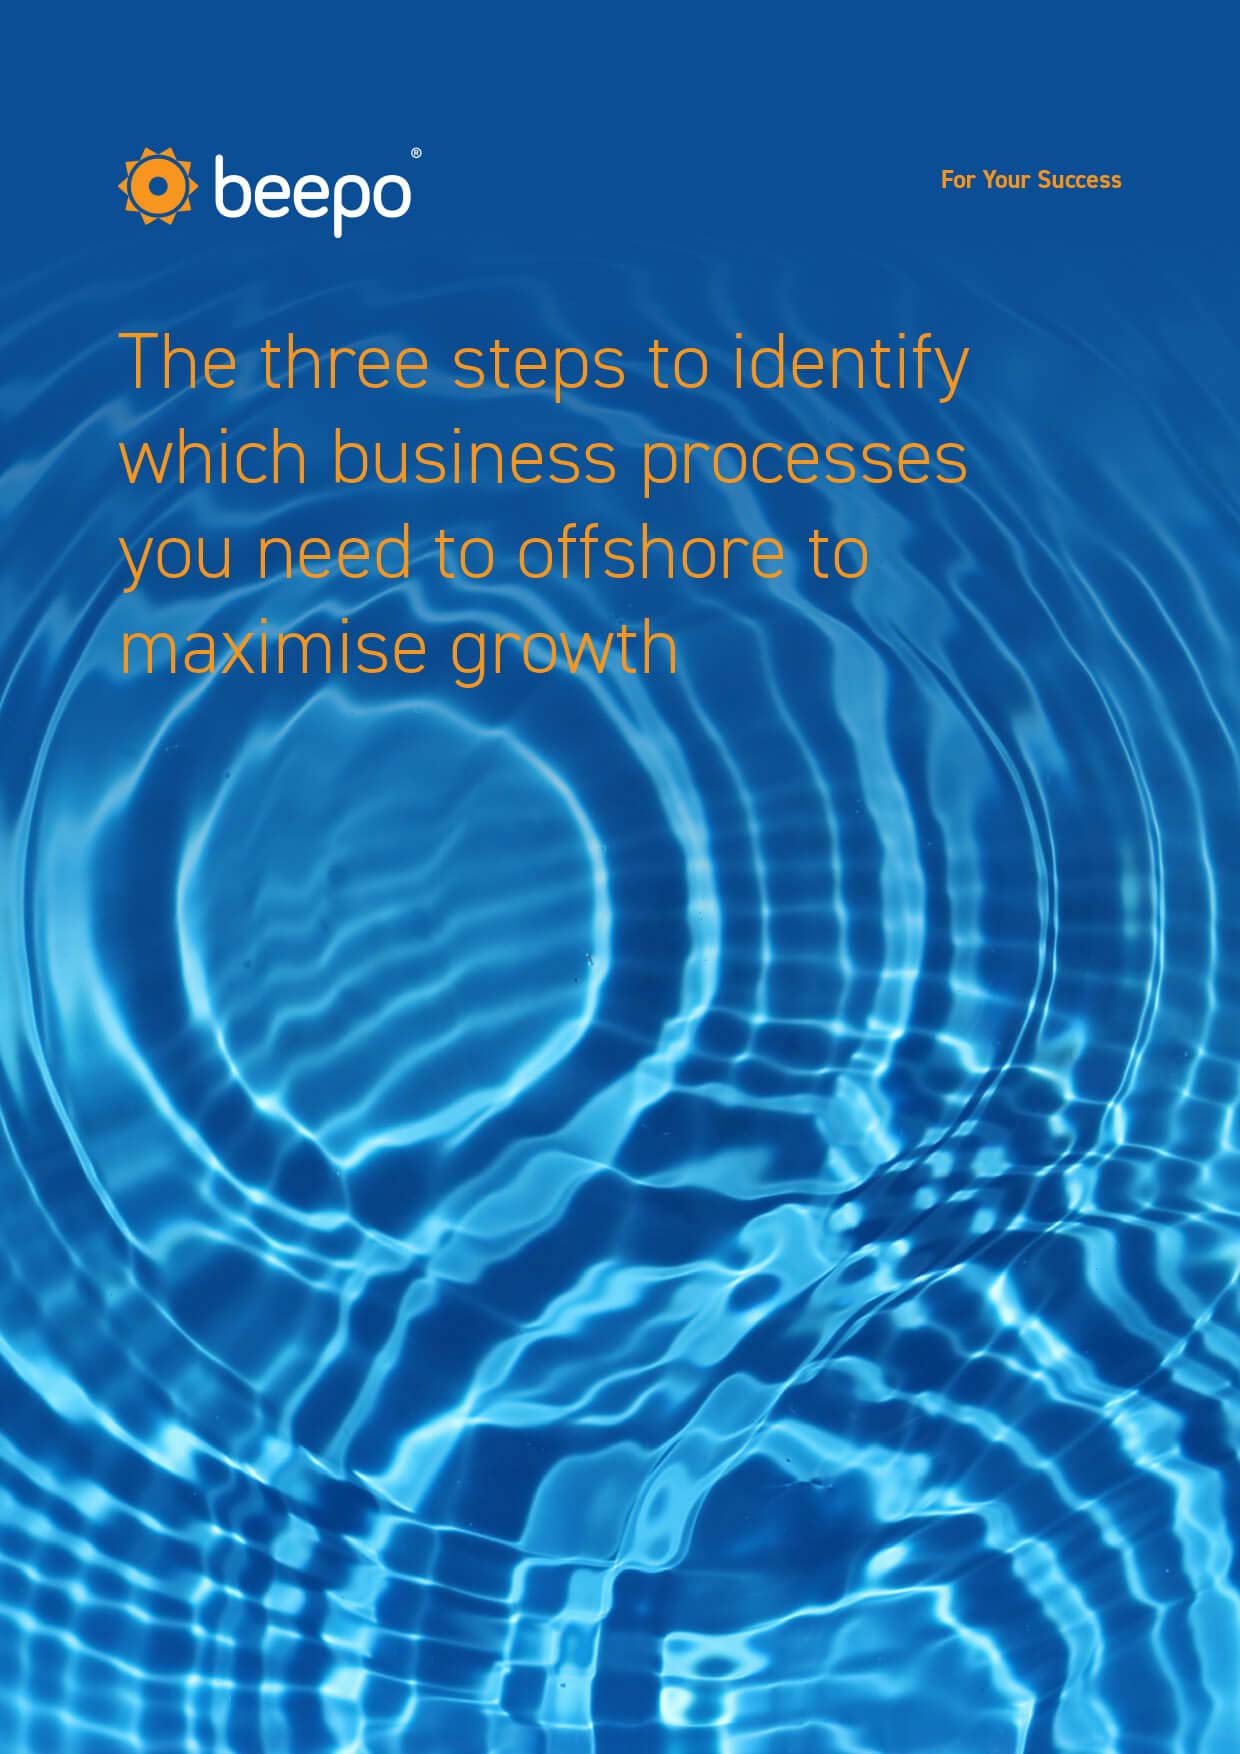 The three steps to identify which business processes you need to offshore to maximise growth